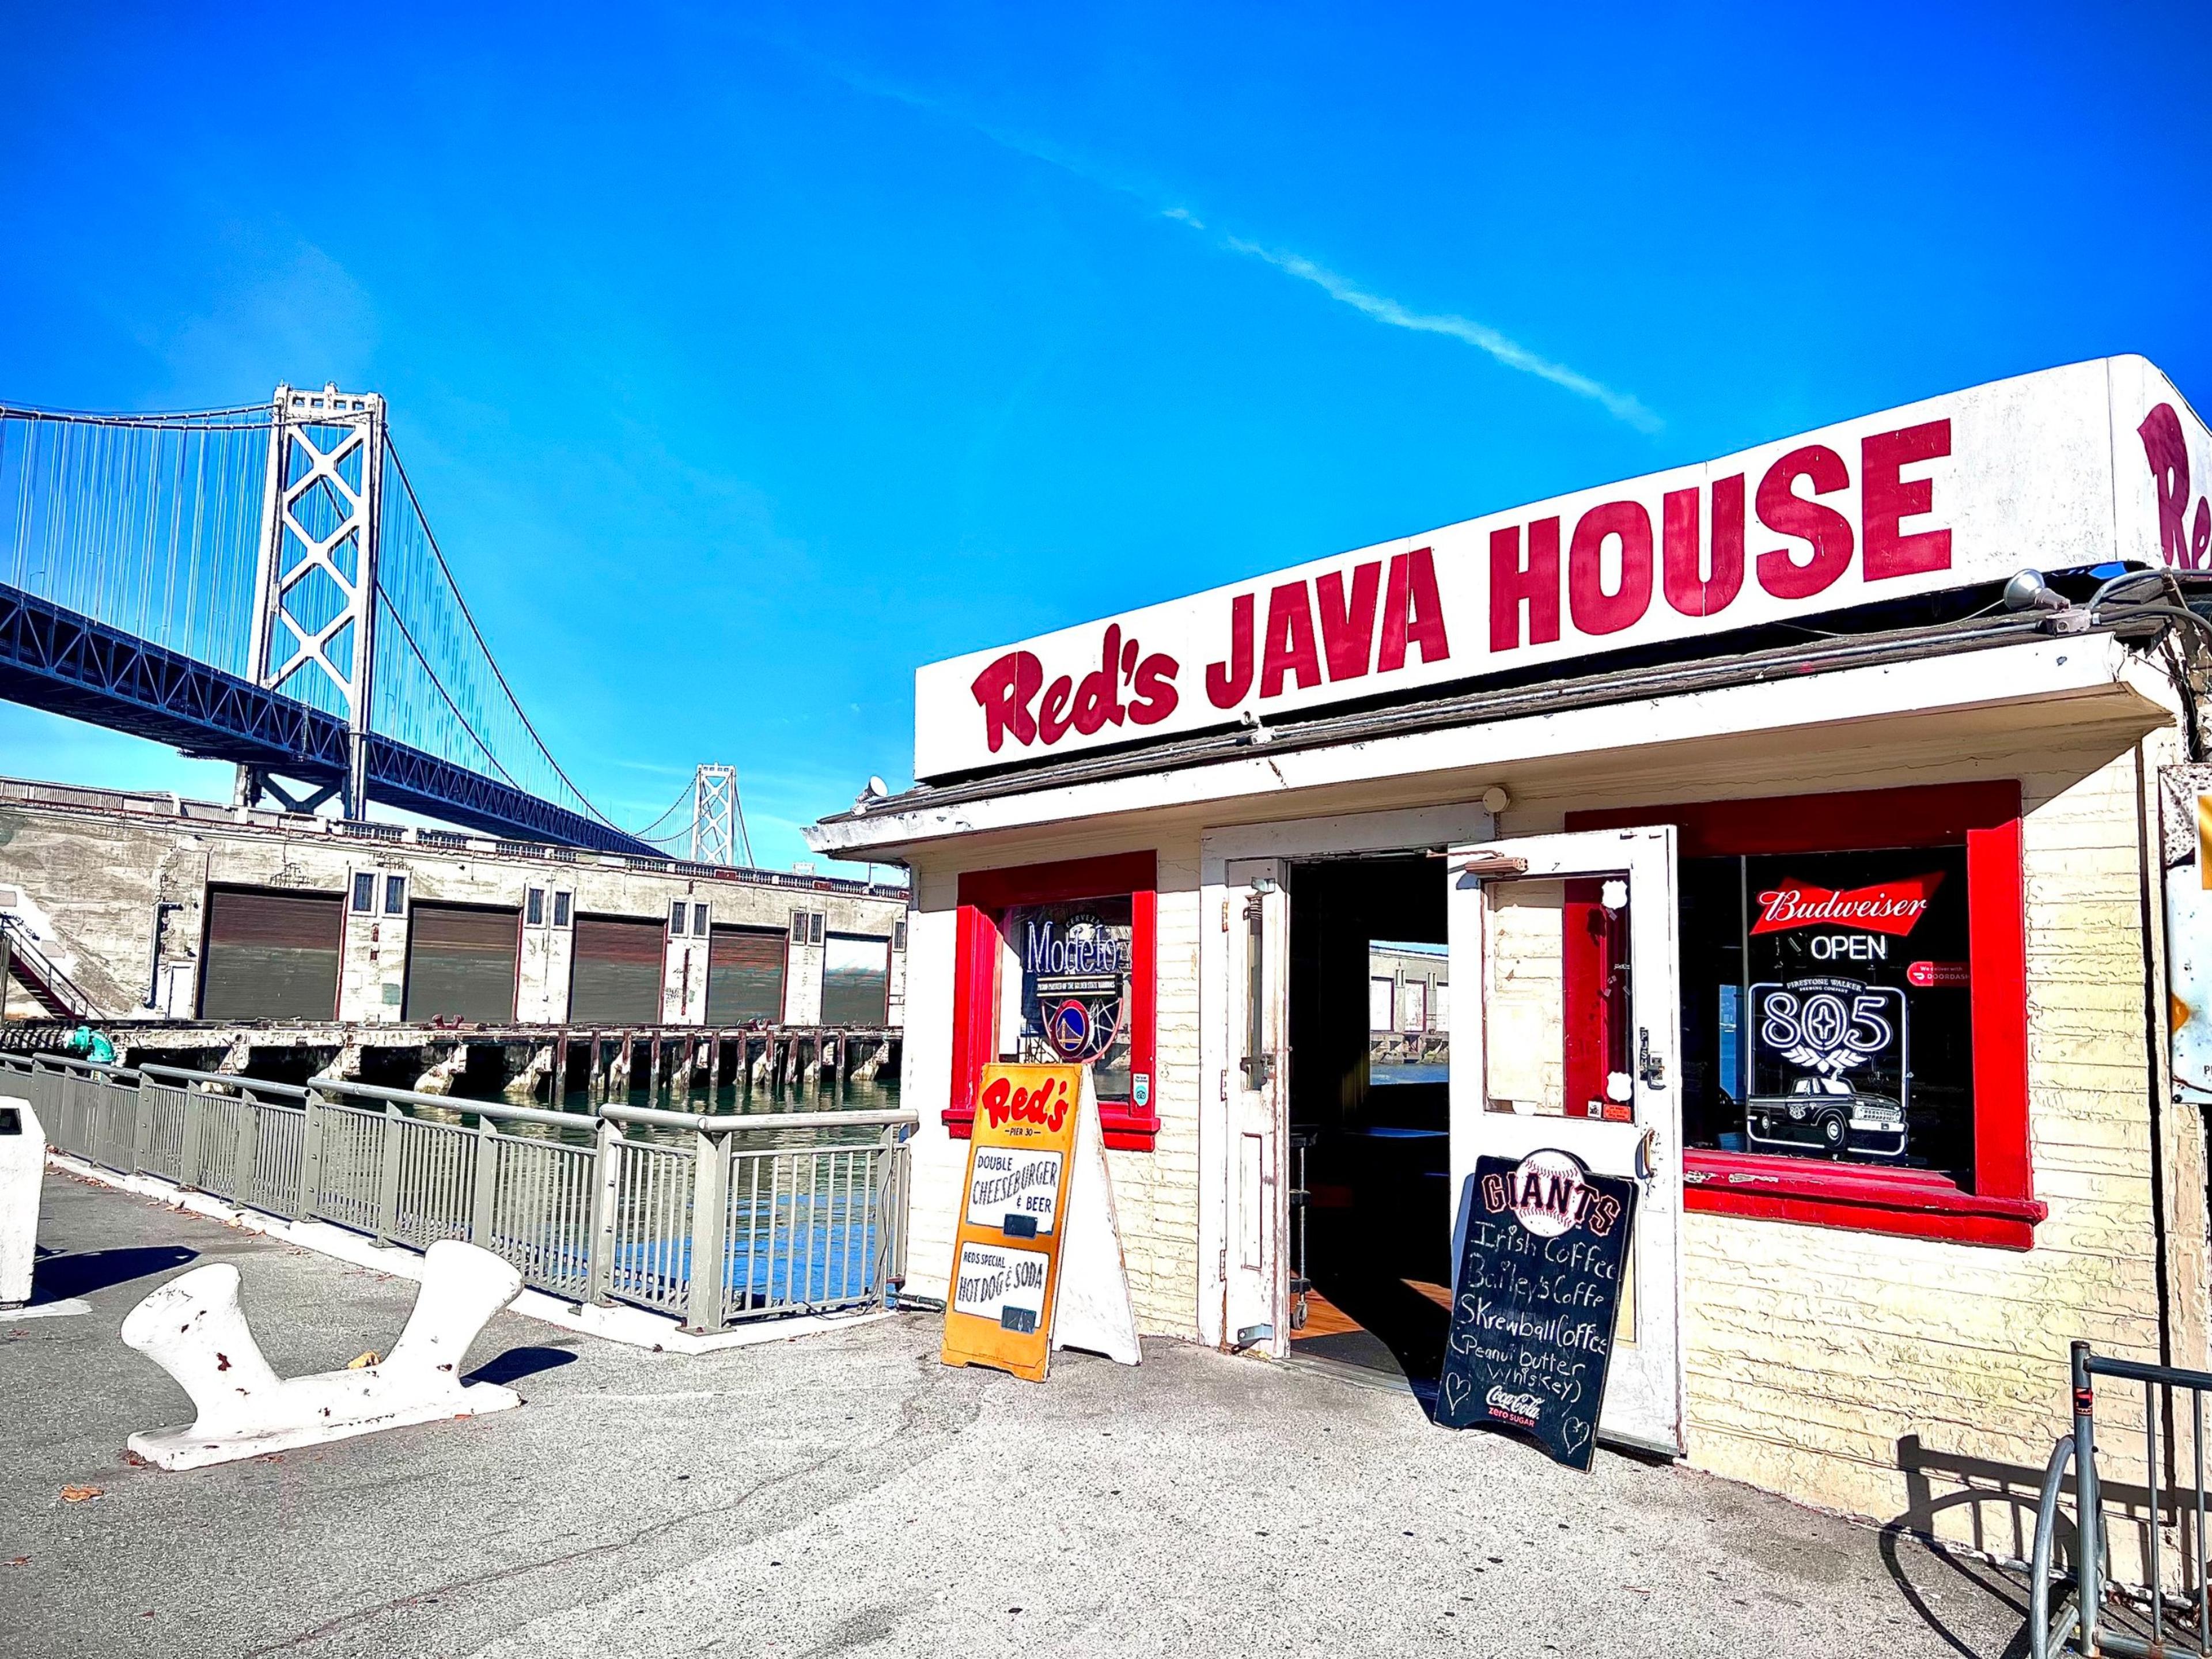 Red's Java House